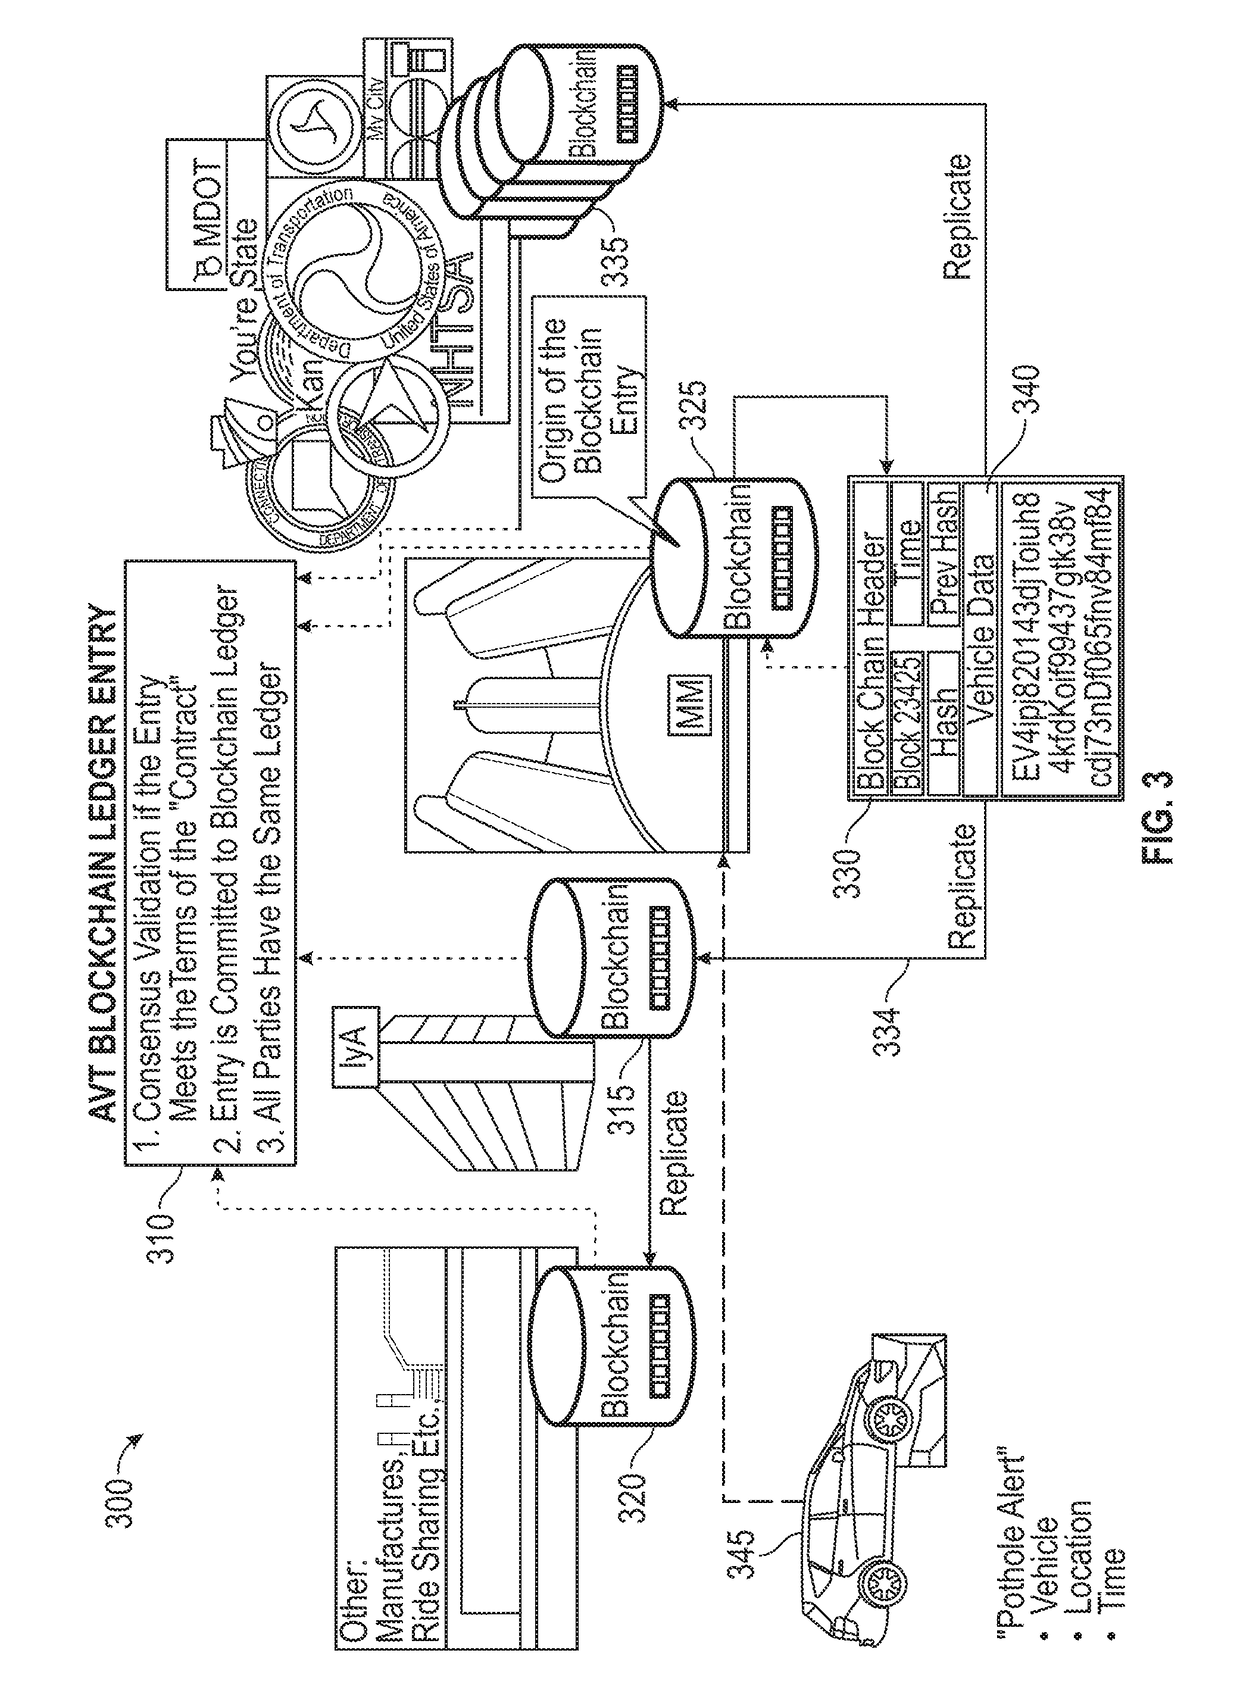 Method and system using a blockchain database for data exchange between vehicles and entities